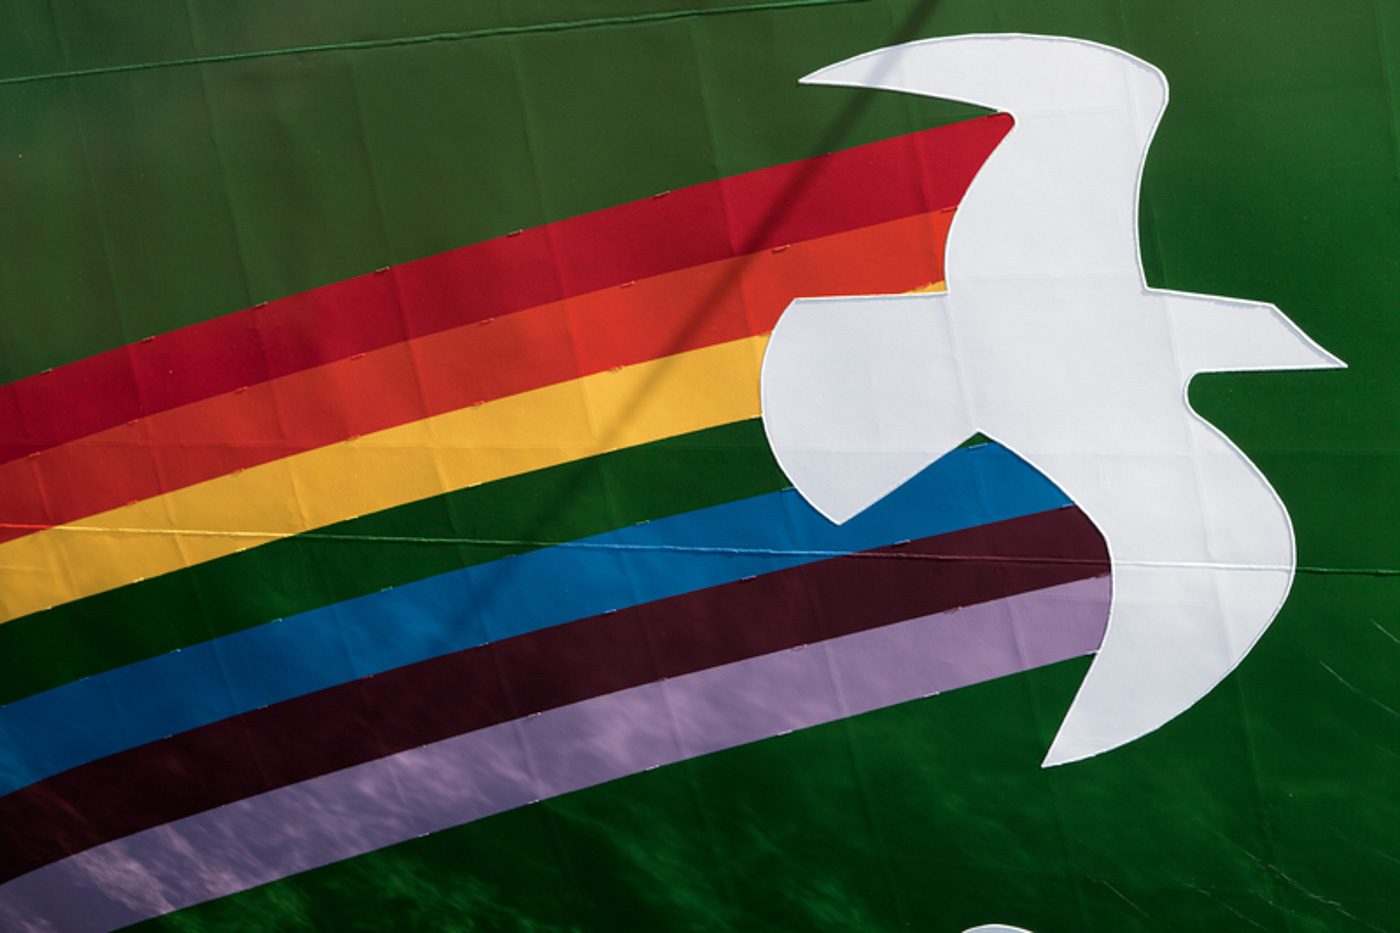 FLAGSHIP. Detail of the peace dove and rainbow emblem at the bow of Greenpeace's new flagship, the Rainbow Warrior III, at the Broadway Pier in Fell's Point. File photo by Eric Spiegel / Greenpeace 